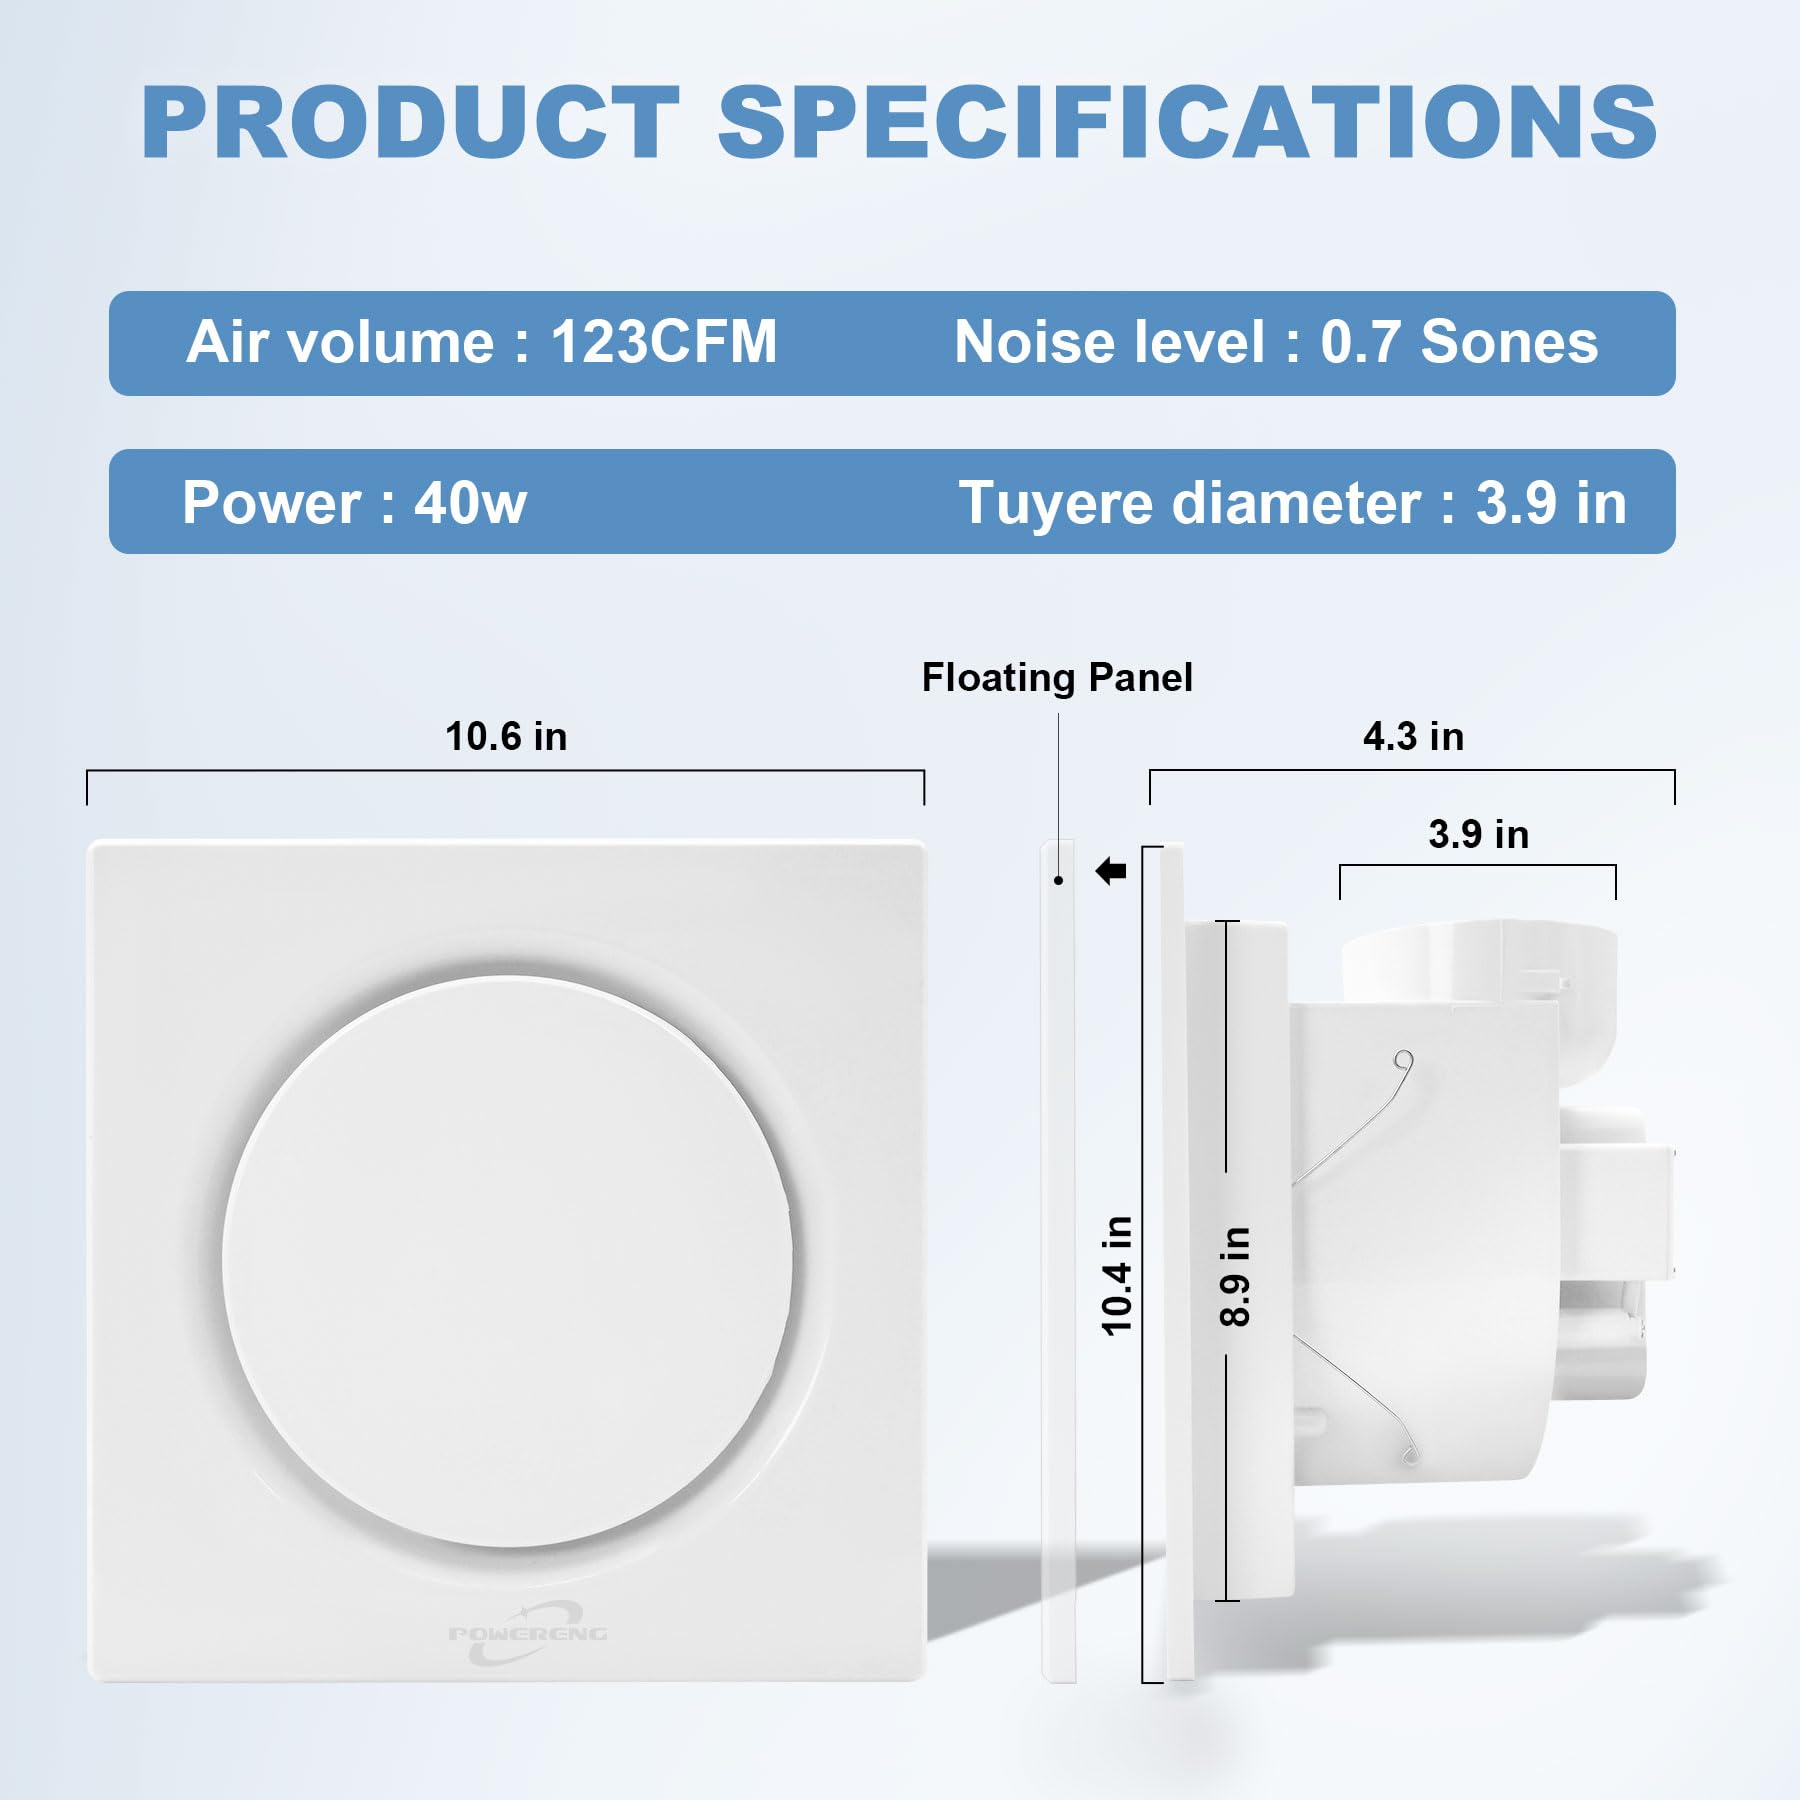 POWERENG Bathroom Fan Ultra-Quiet Bathroom Ventilation, Exhaust Fan,123CFM 0.7 Sones 40W,4 Inch Duct Collar,White,9 Inch Opening size,Easy to Install & Replace